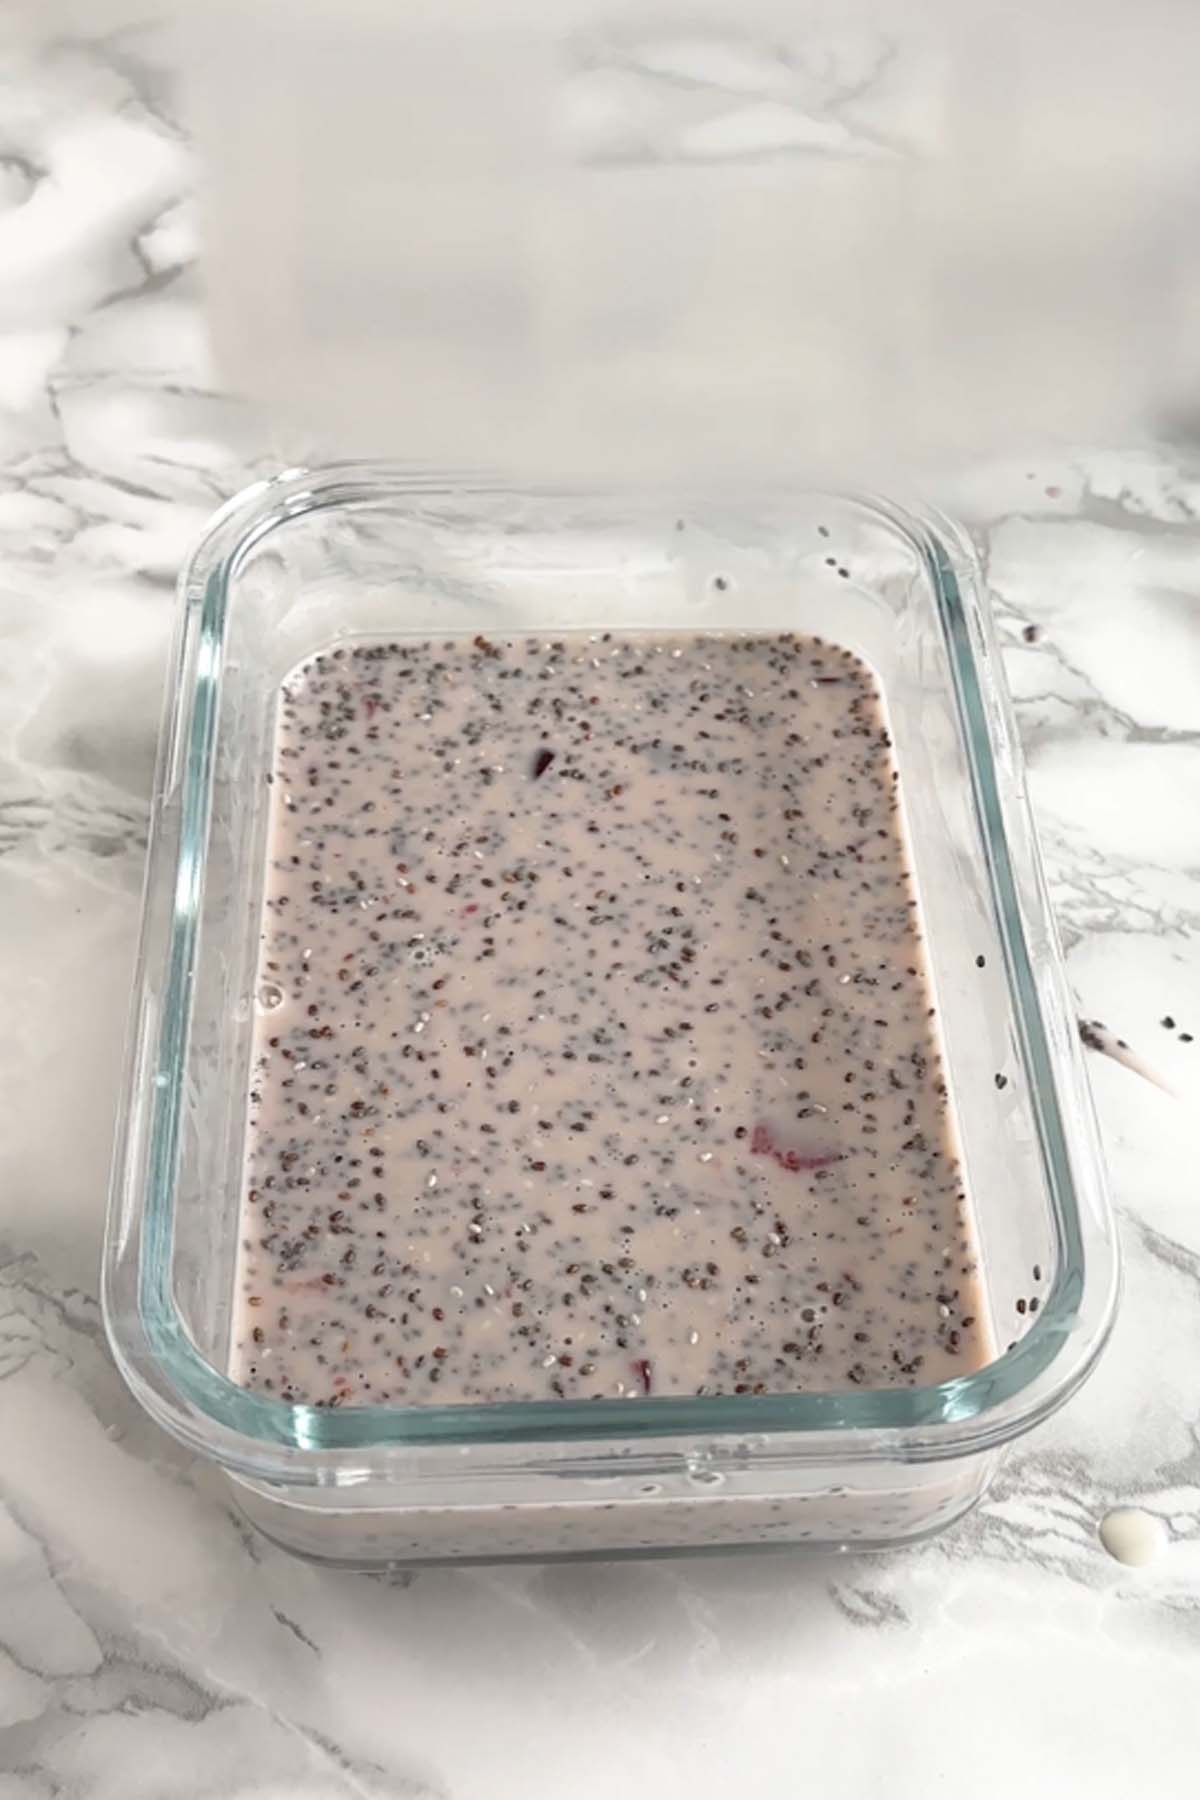 A lid is added to a dish of chia pudding.